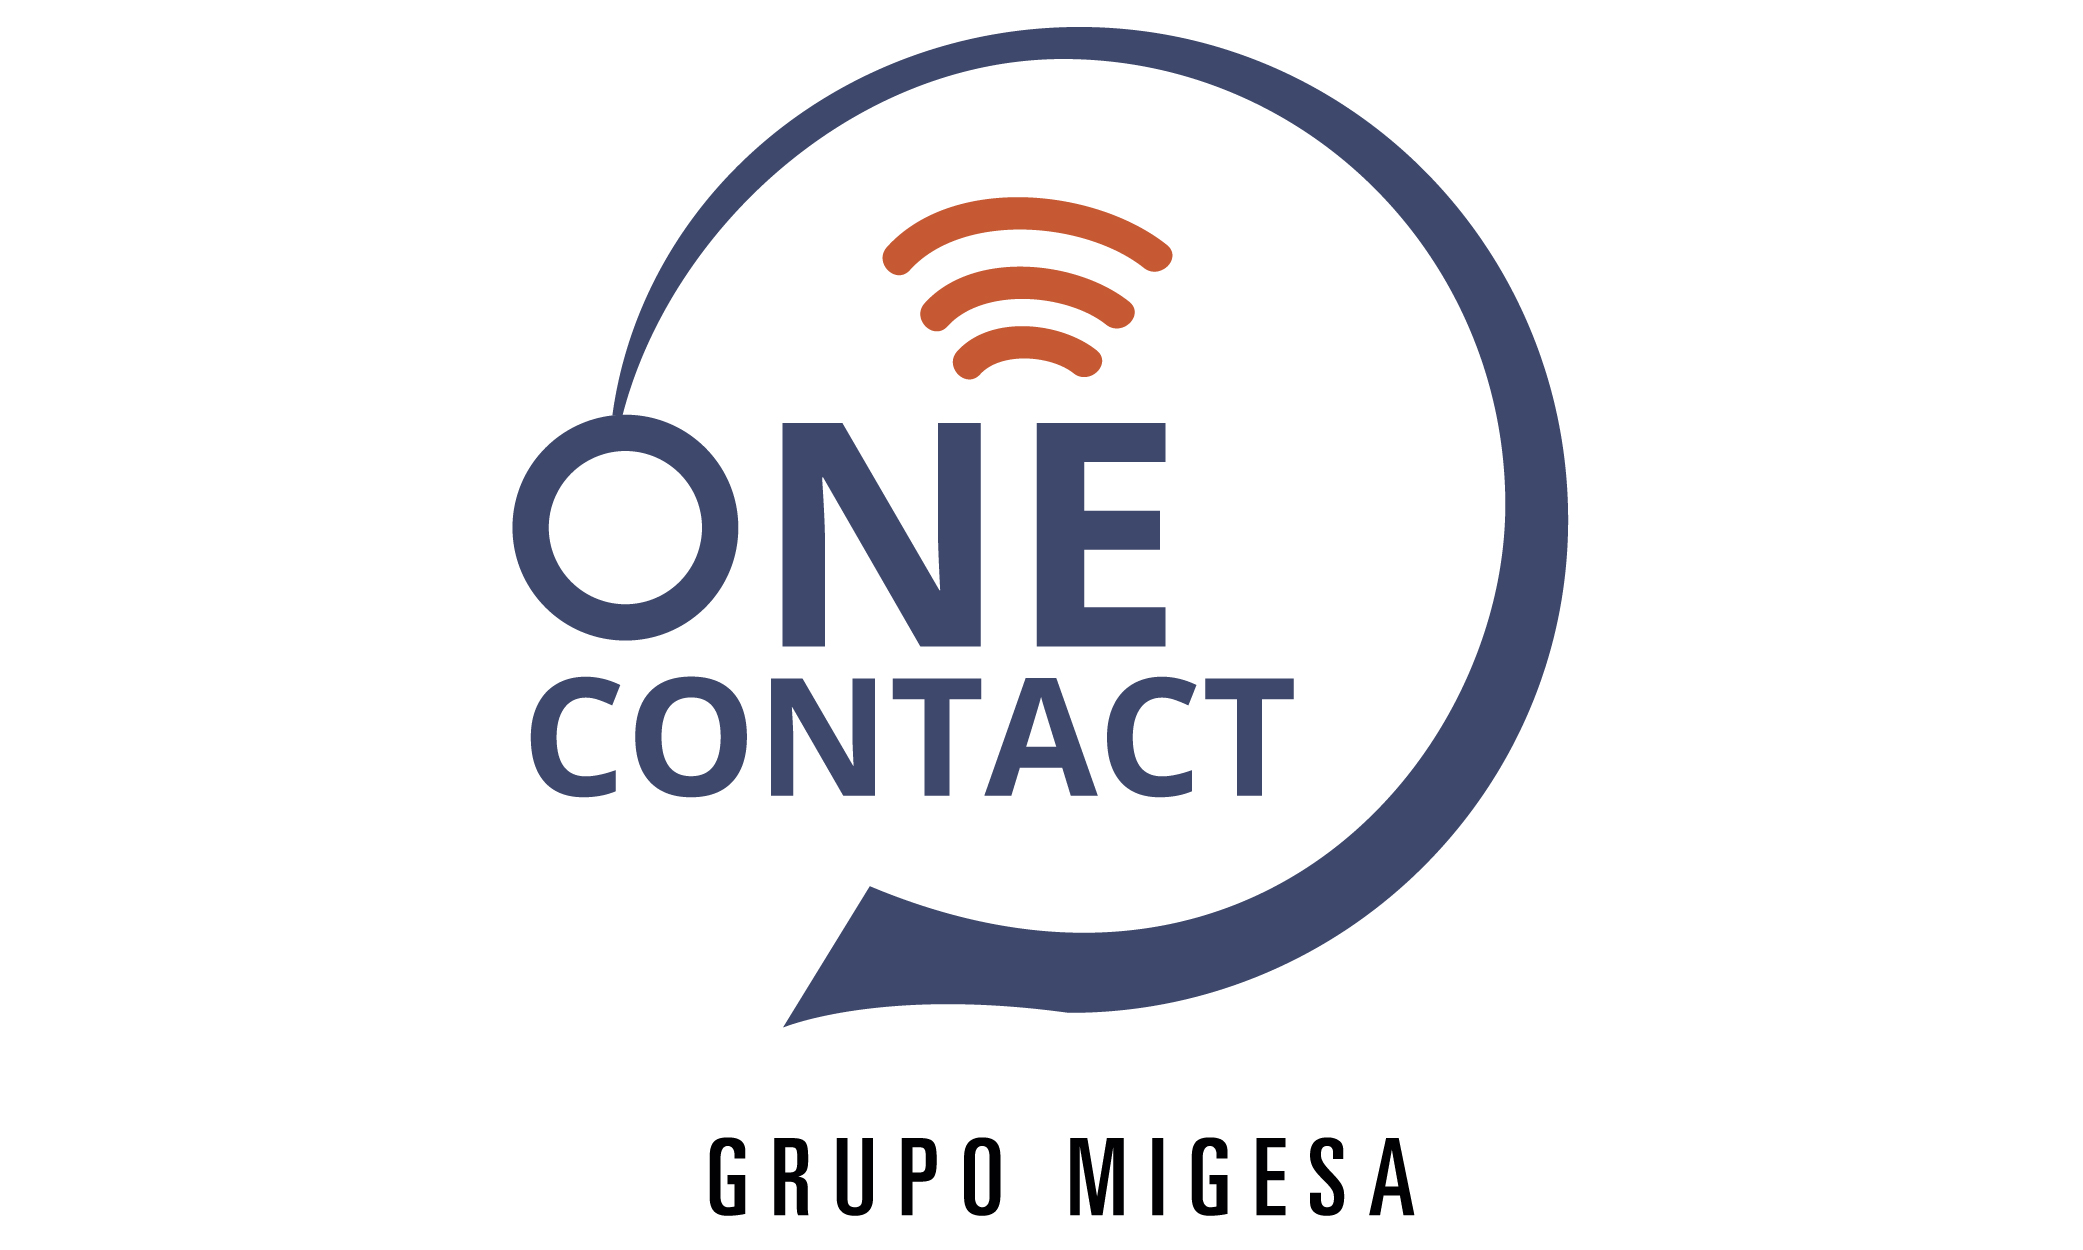 One Contact by Grupo Migesa